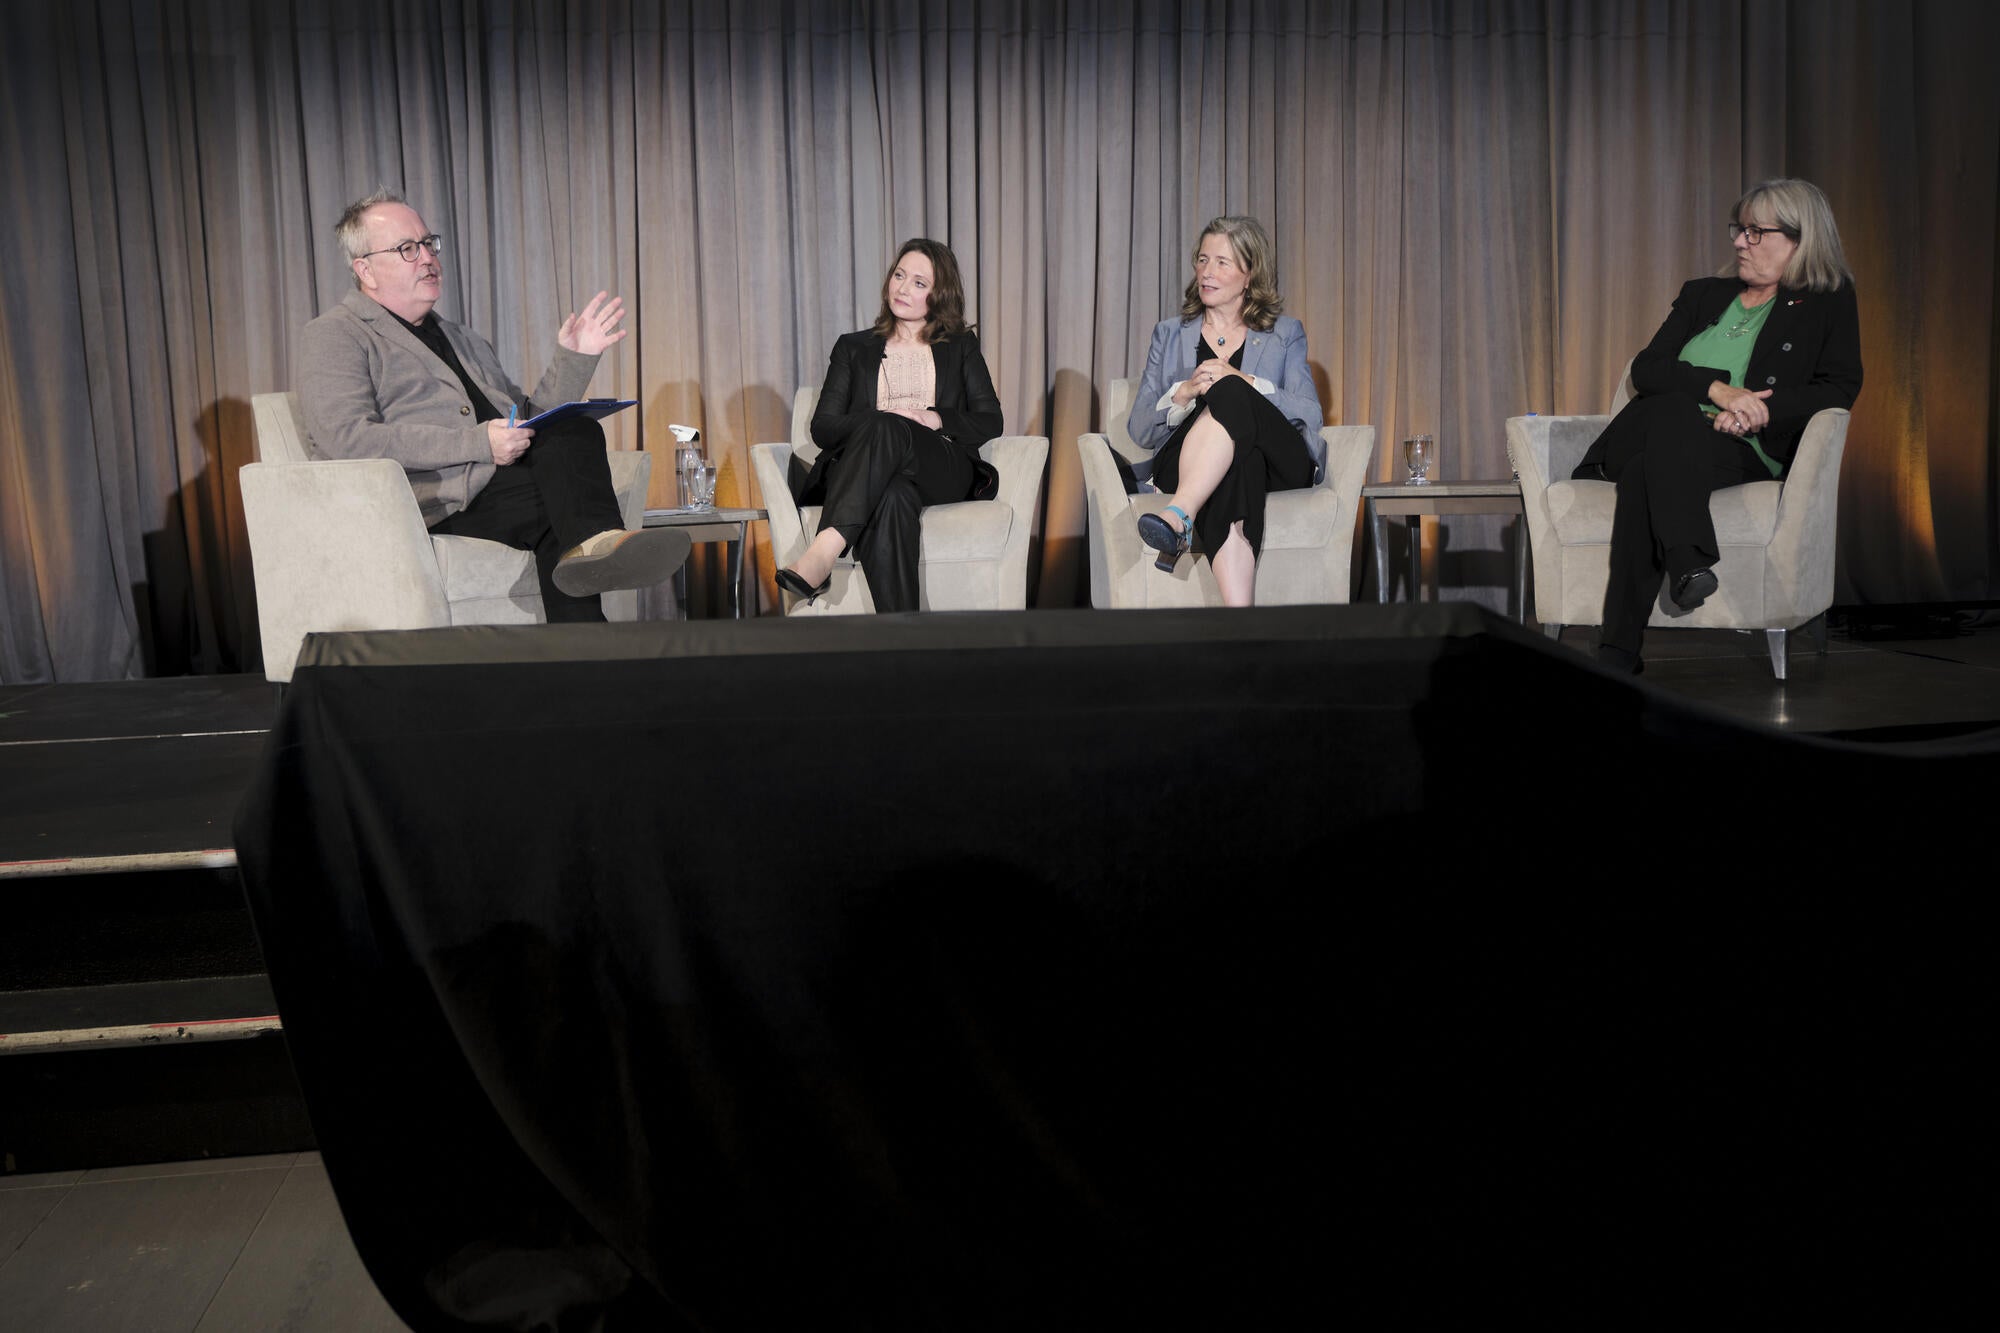 TRuST Launch event featuring, on panel left to right, Craig Norris, Ashley Rose Mehlenbacher, Mary Wells, and Donna Strickland